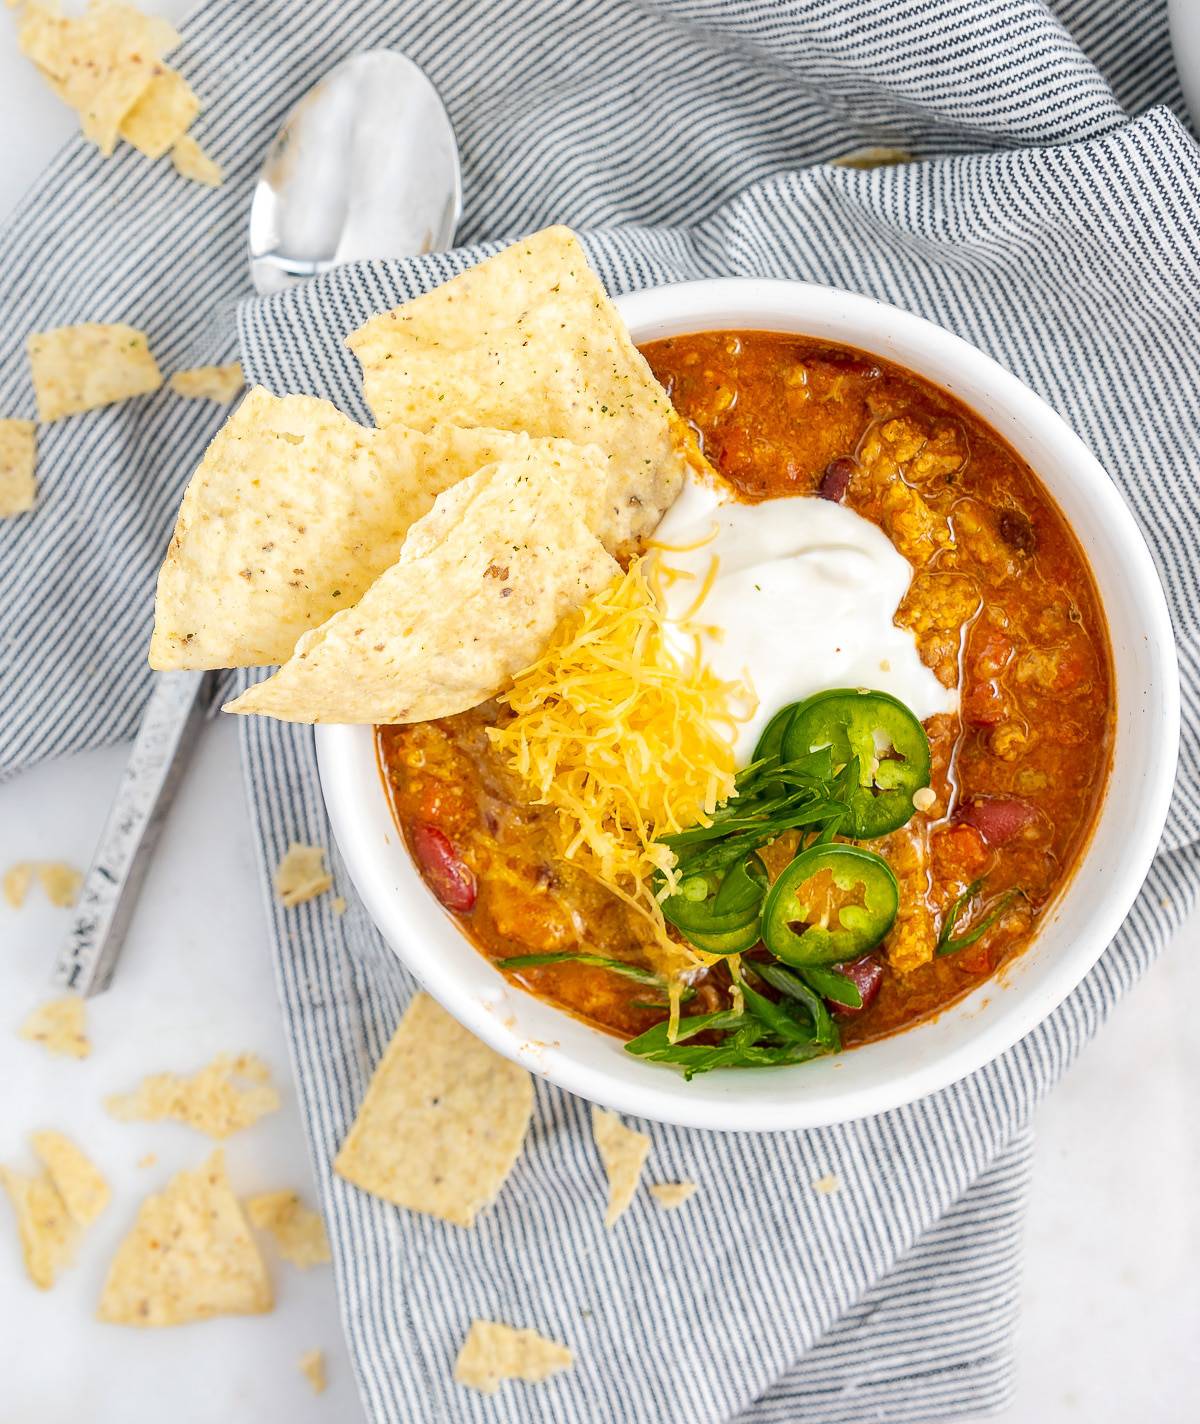 Texas chili in a bowl with fixings - cheese, jalapeno, and sour cream. 